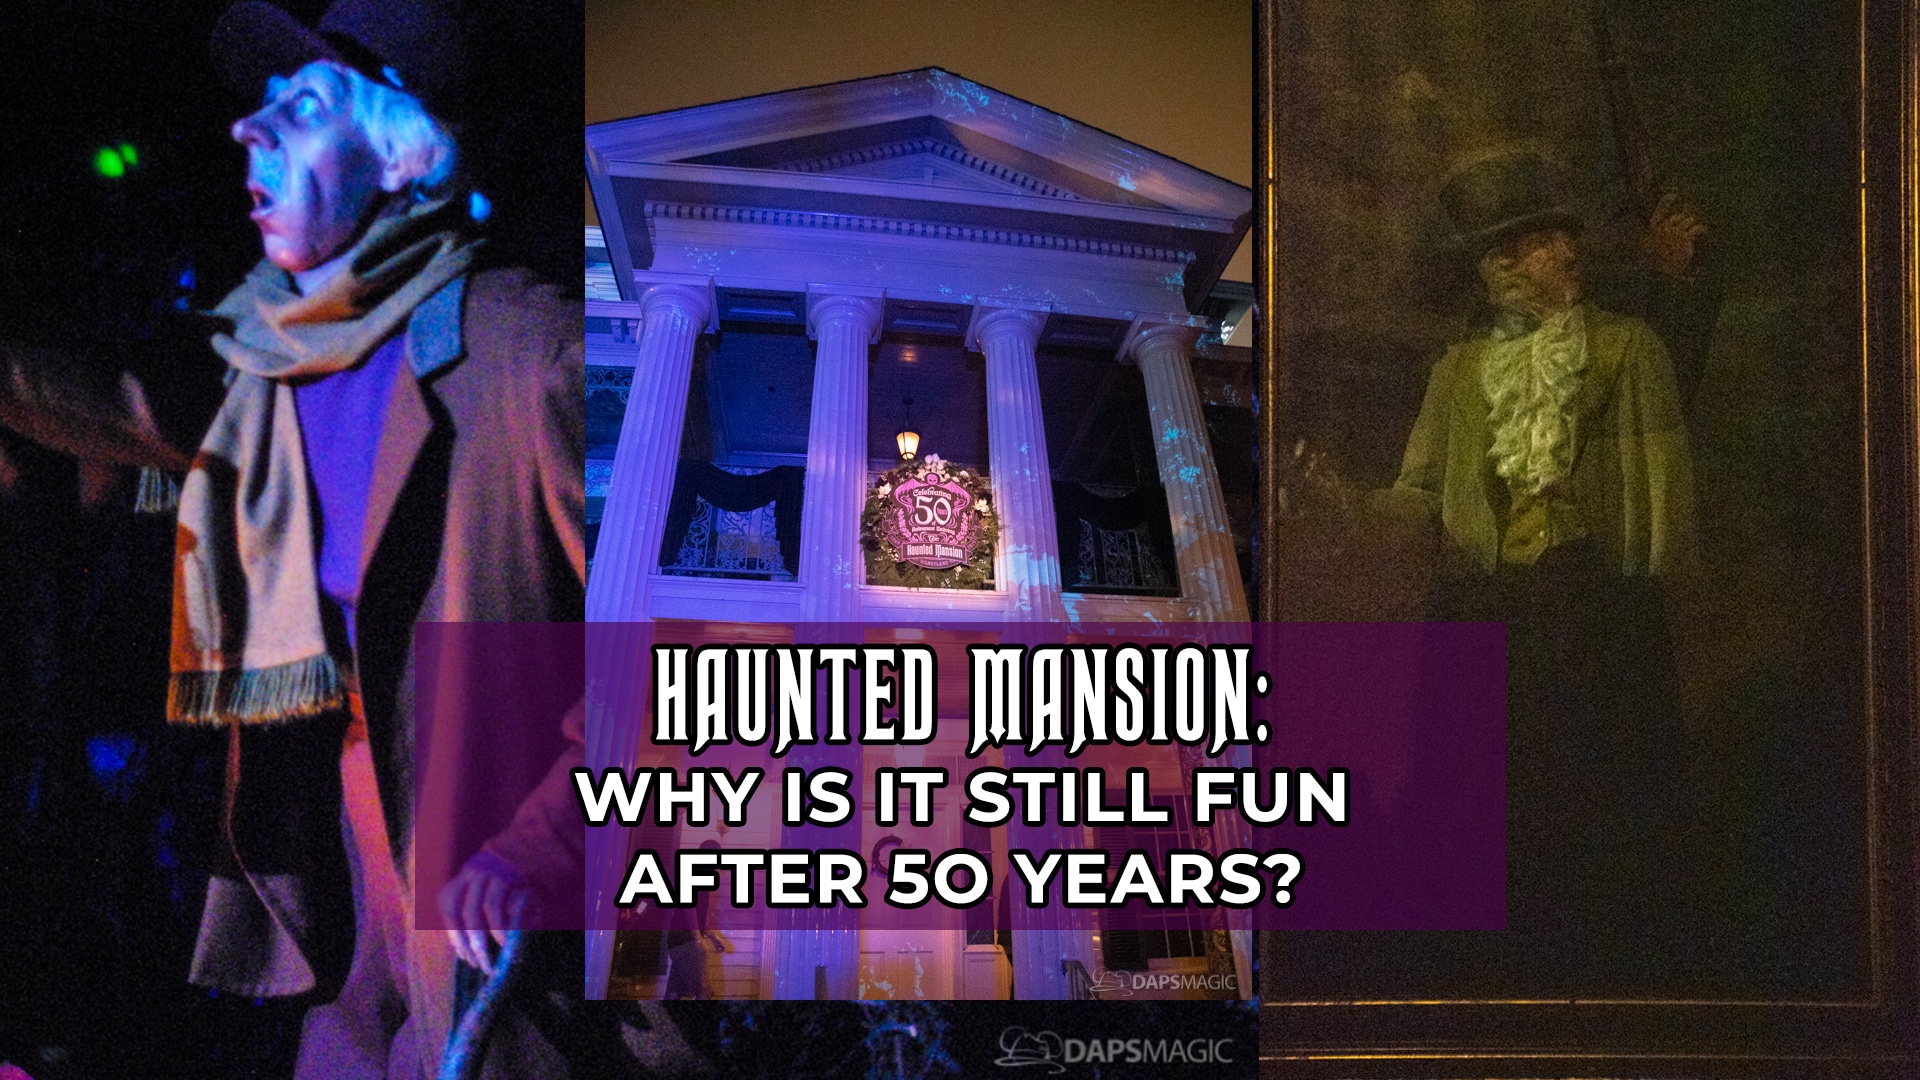 What Makes the Haunted Mansion at Disneyland Such a Hauntingly Fun Ride After 50 Years?